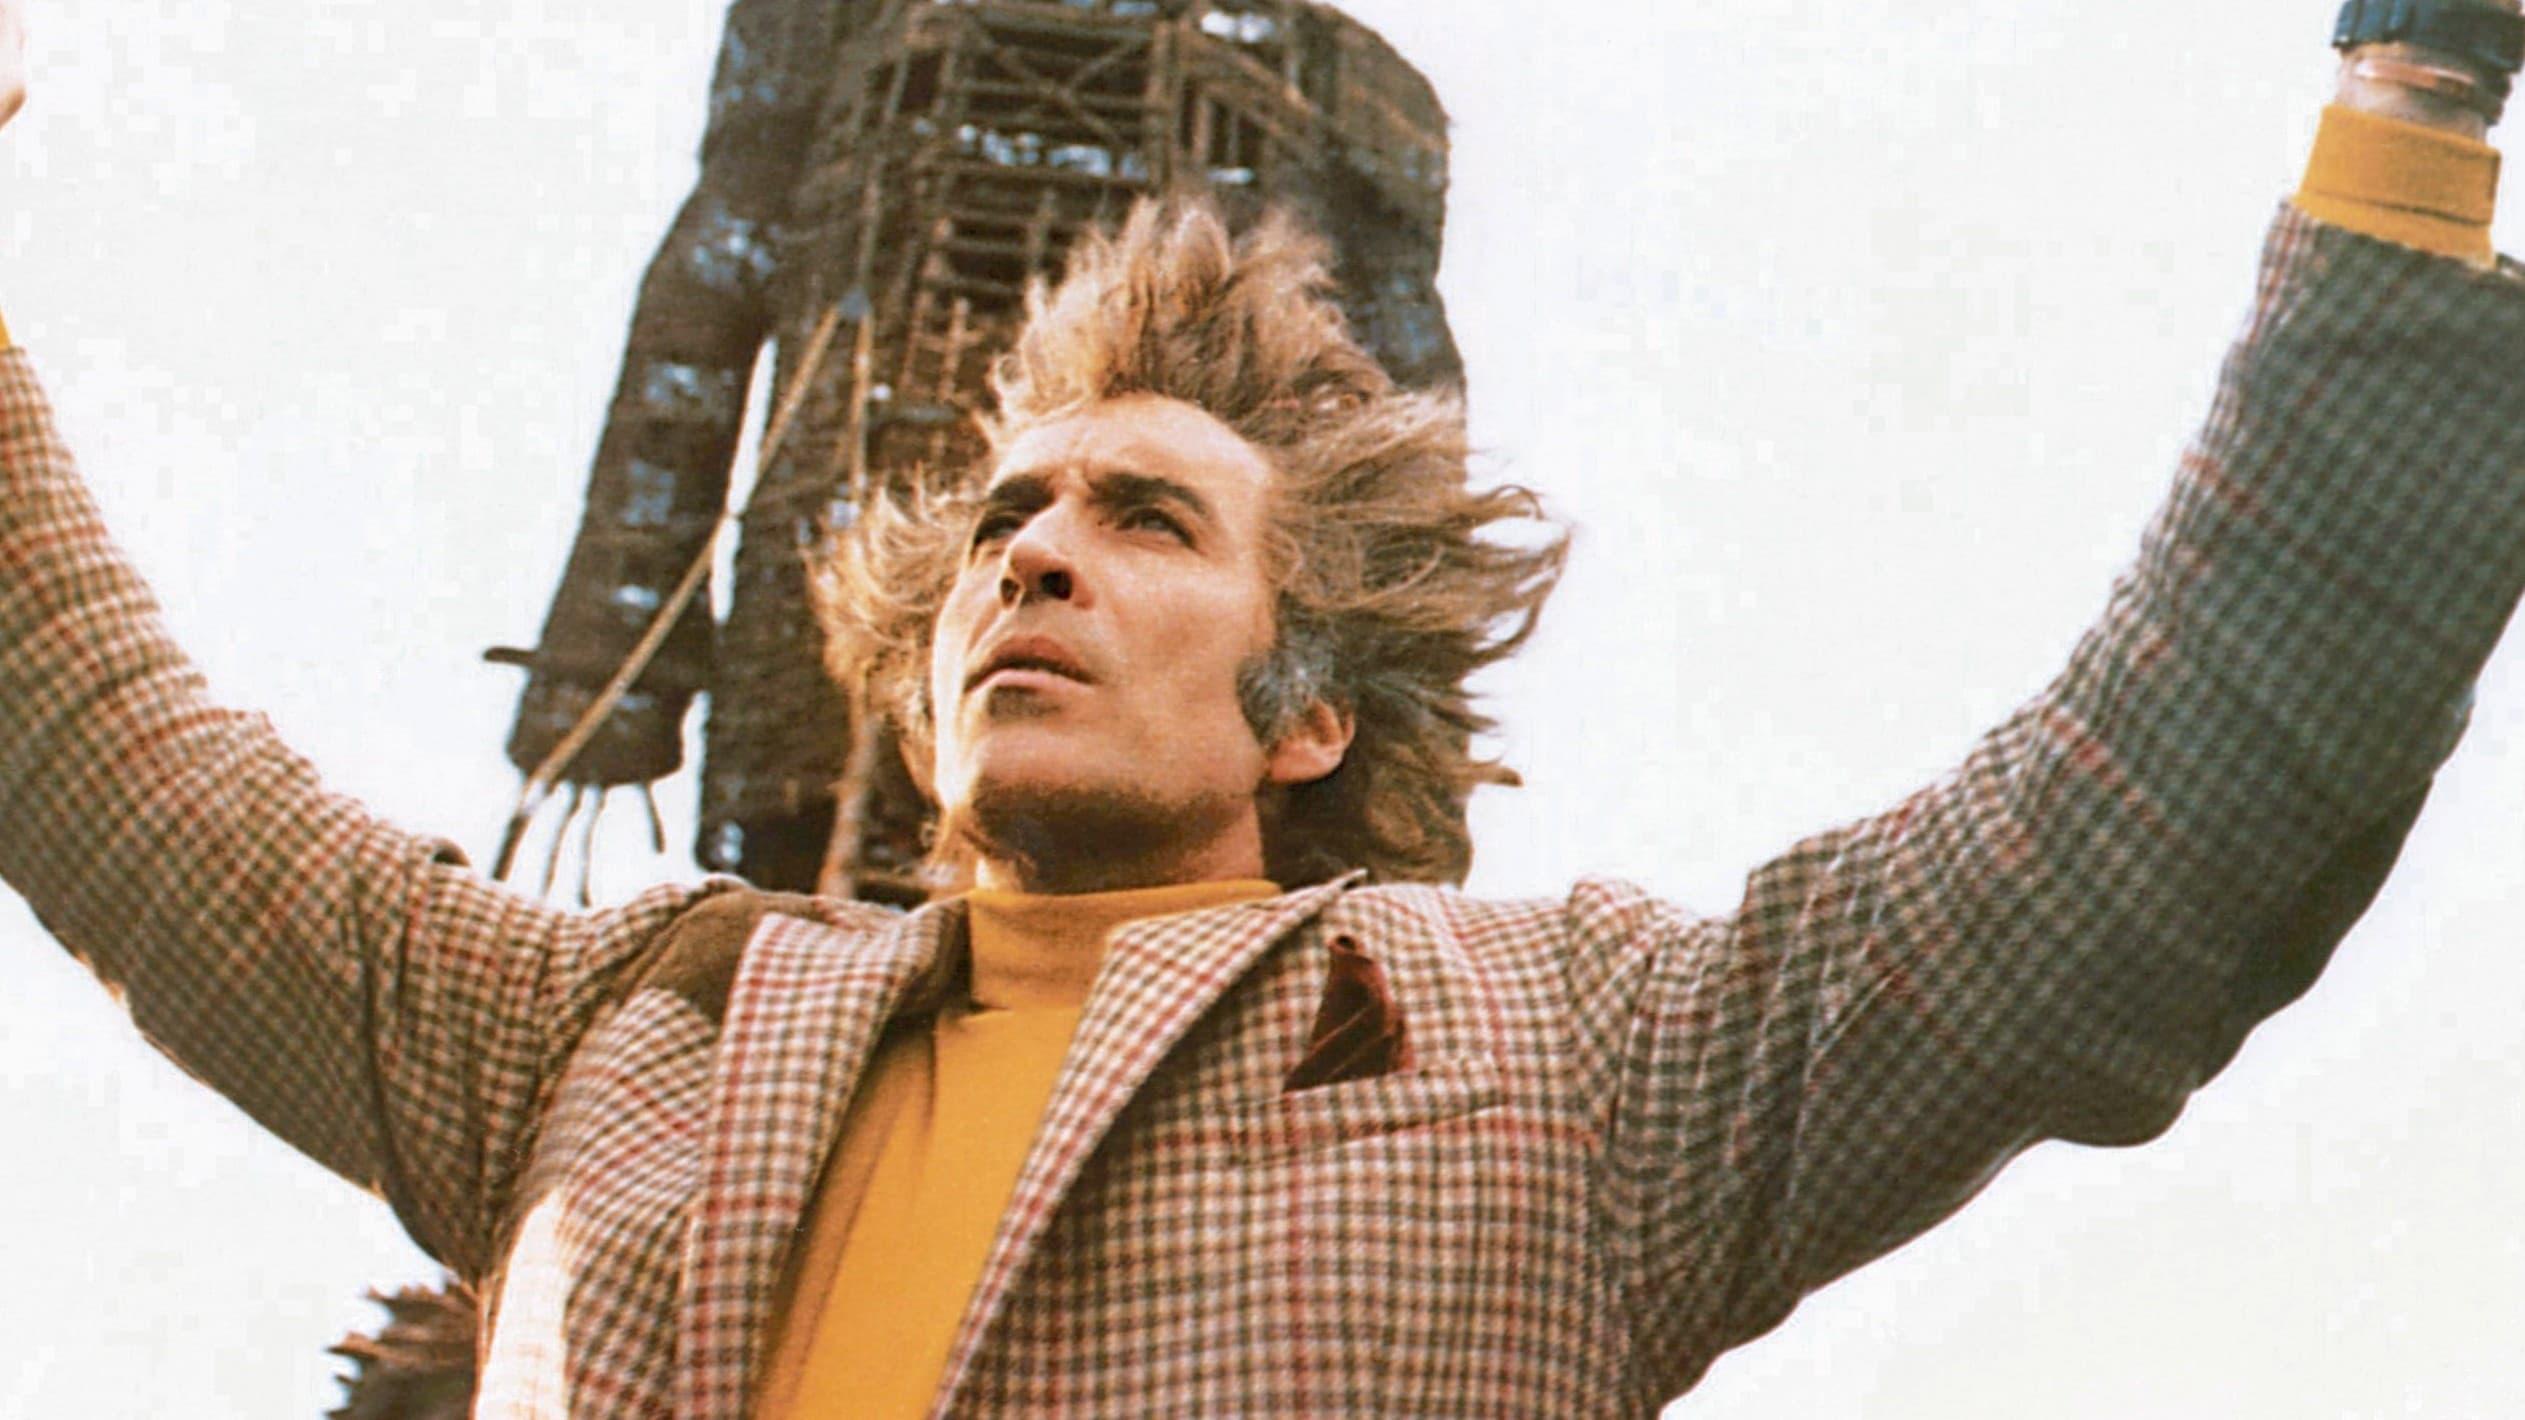 The Life and Deaths of Christopher Lee backdrop